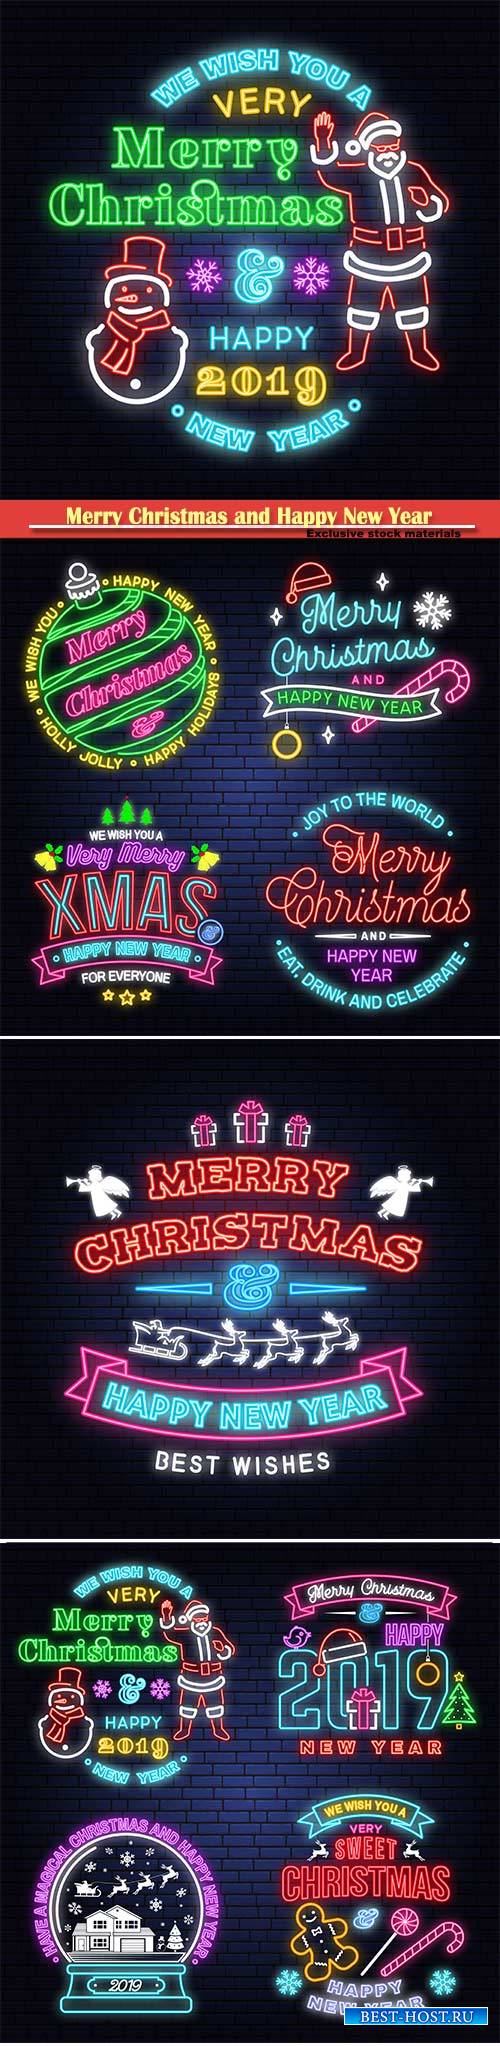 Merry Christmas and Happy New Year neon vector sign